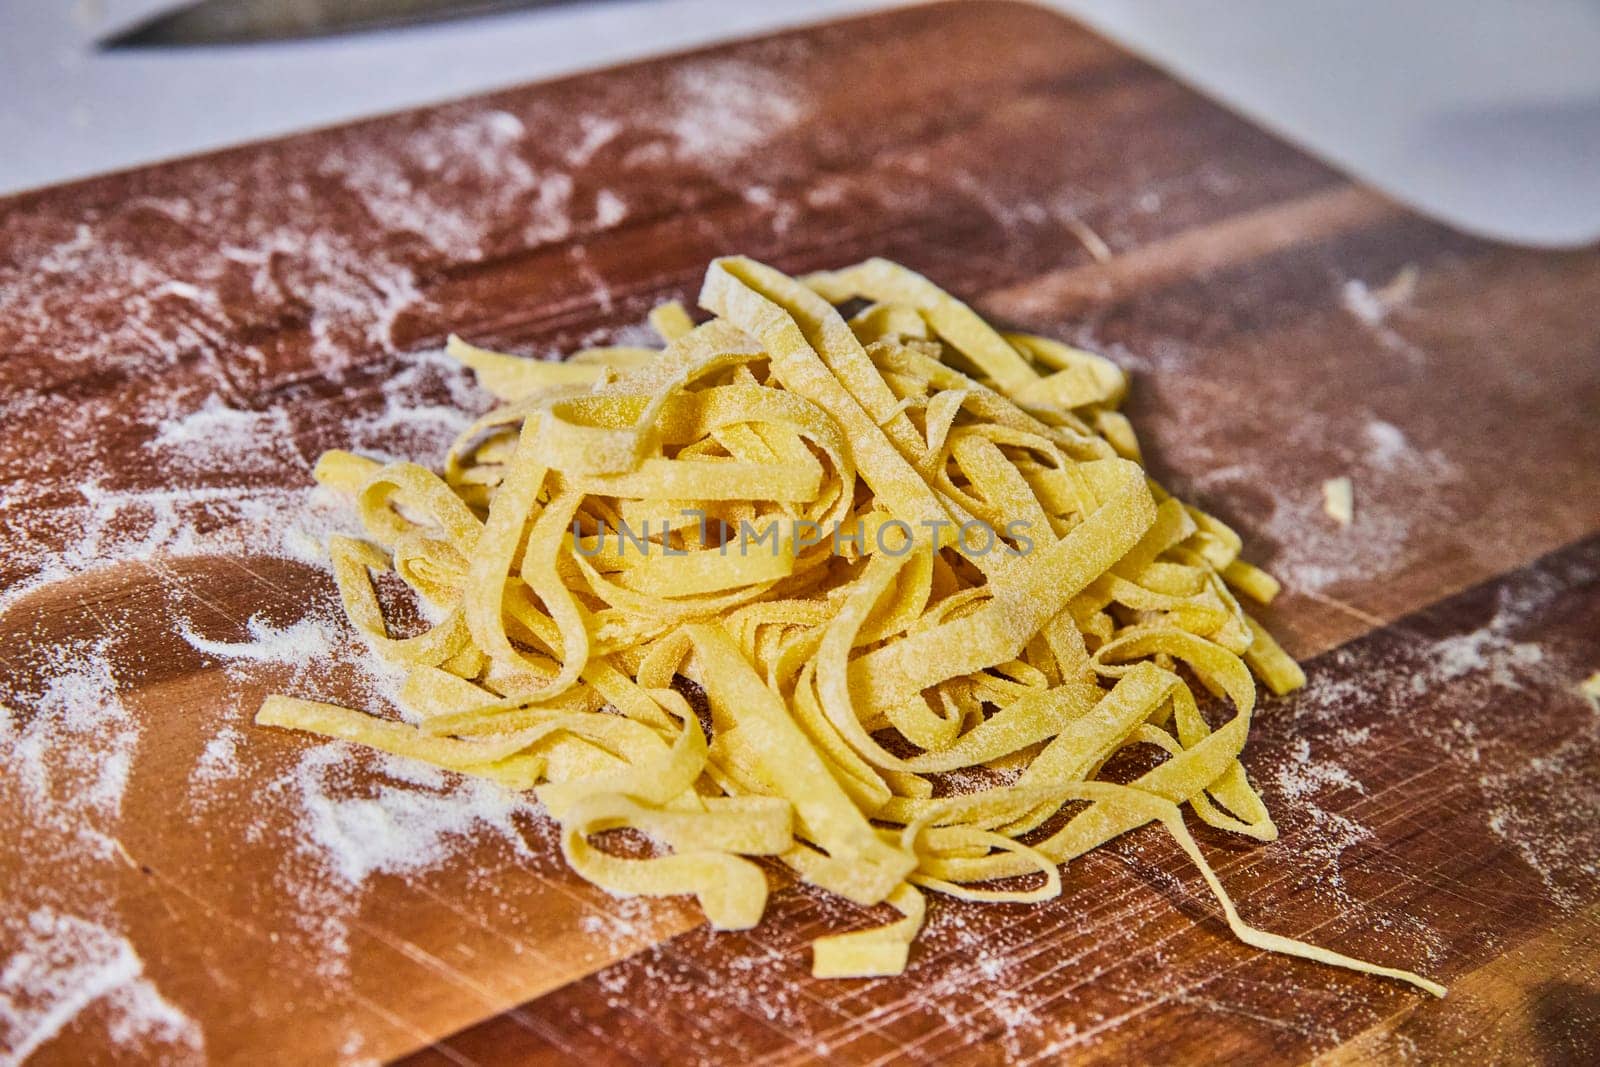 Handcrafted fettuccine pasta on a rustic wooden board in a sunlit kitchen, showcasing traditional Italian culinary art from Indiana.